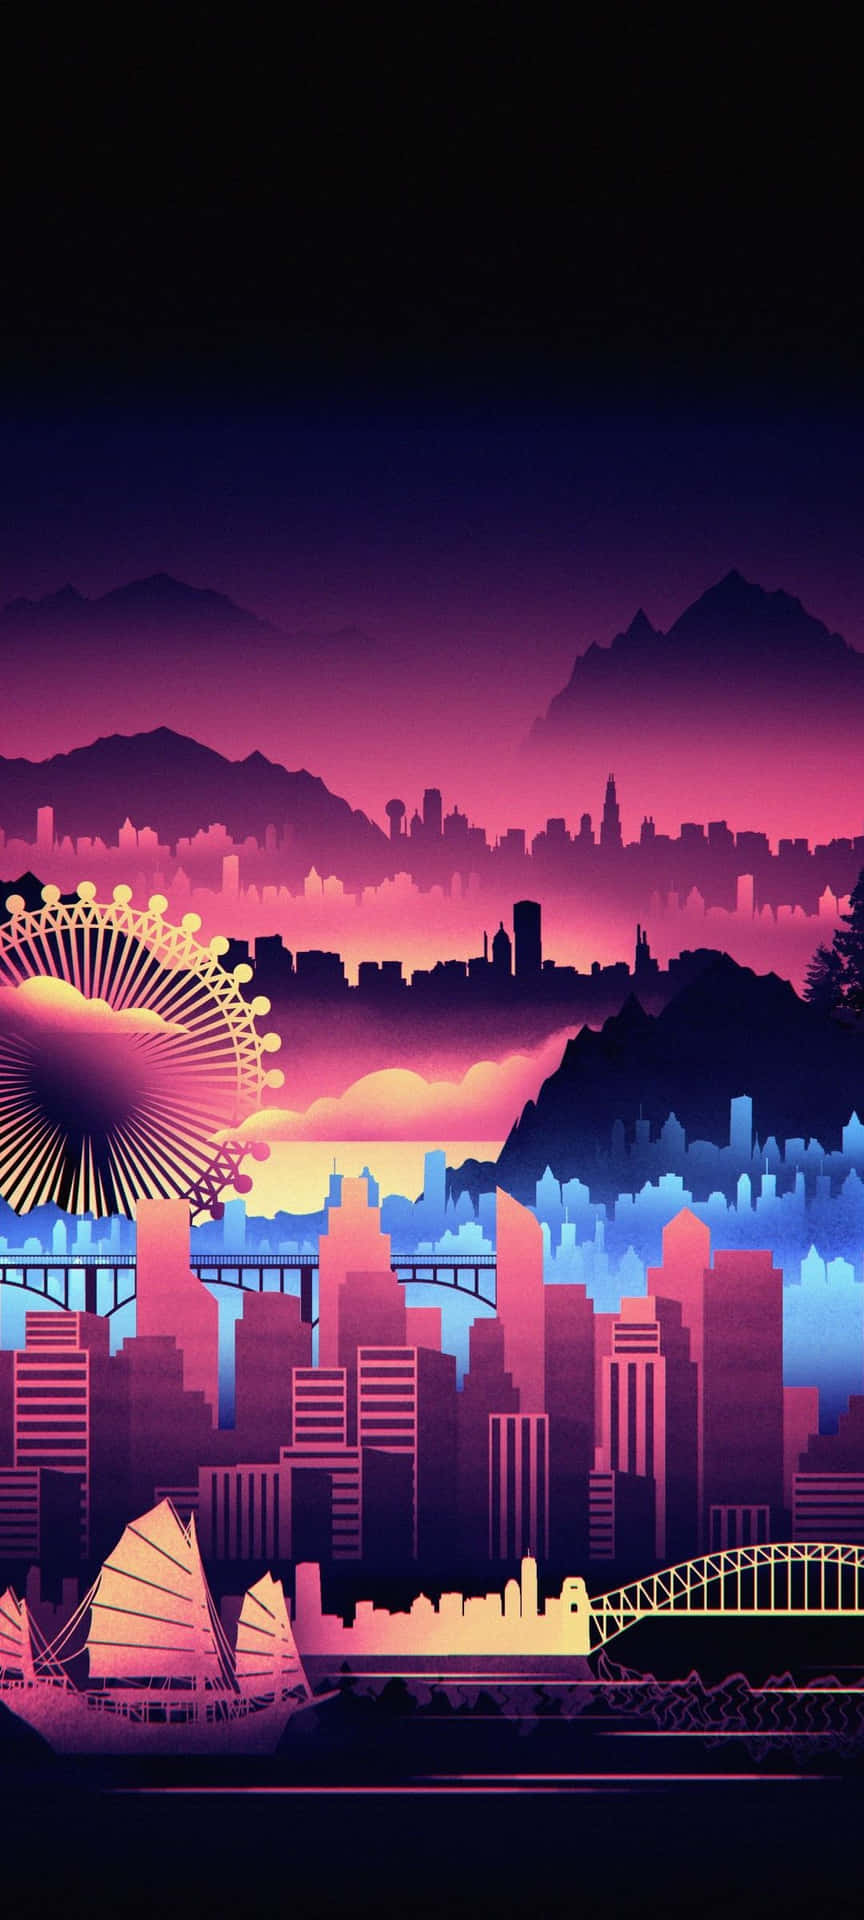 Journey through the neon avenues of Synthwave City Wallpaper